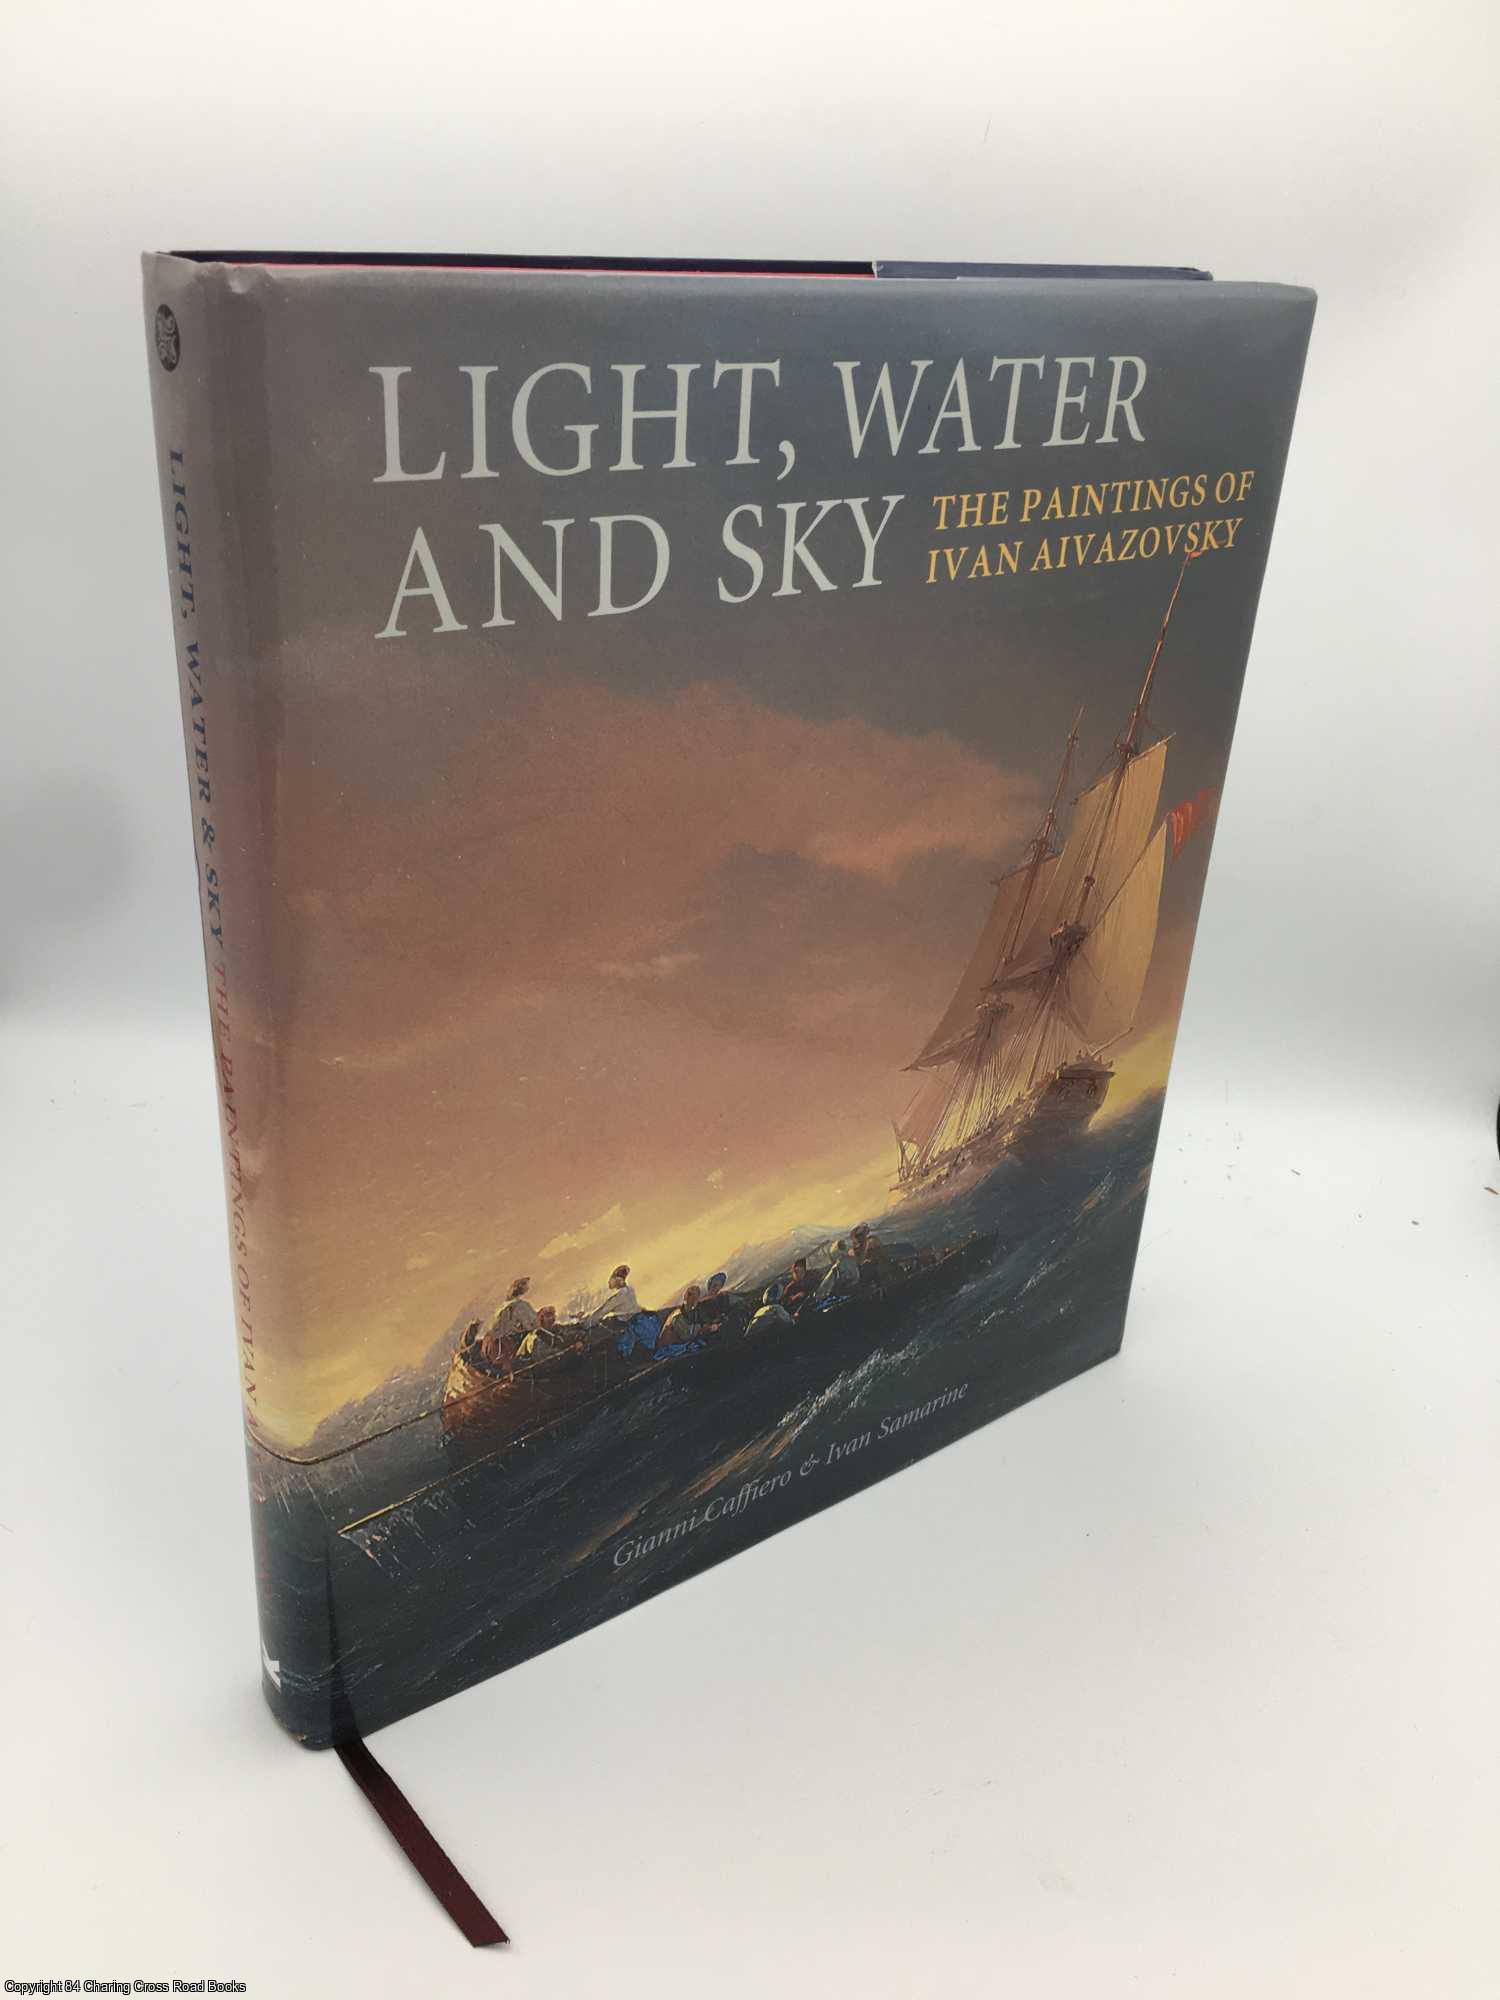 Caffiero, Gianni - Light, Water and Sky: The Paintings of Ivan Aivazovsky